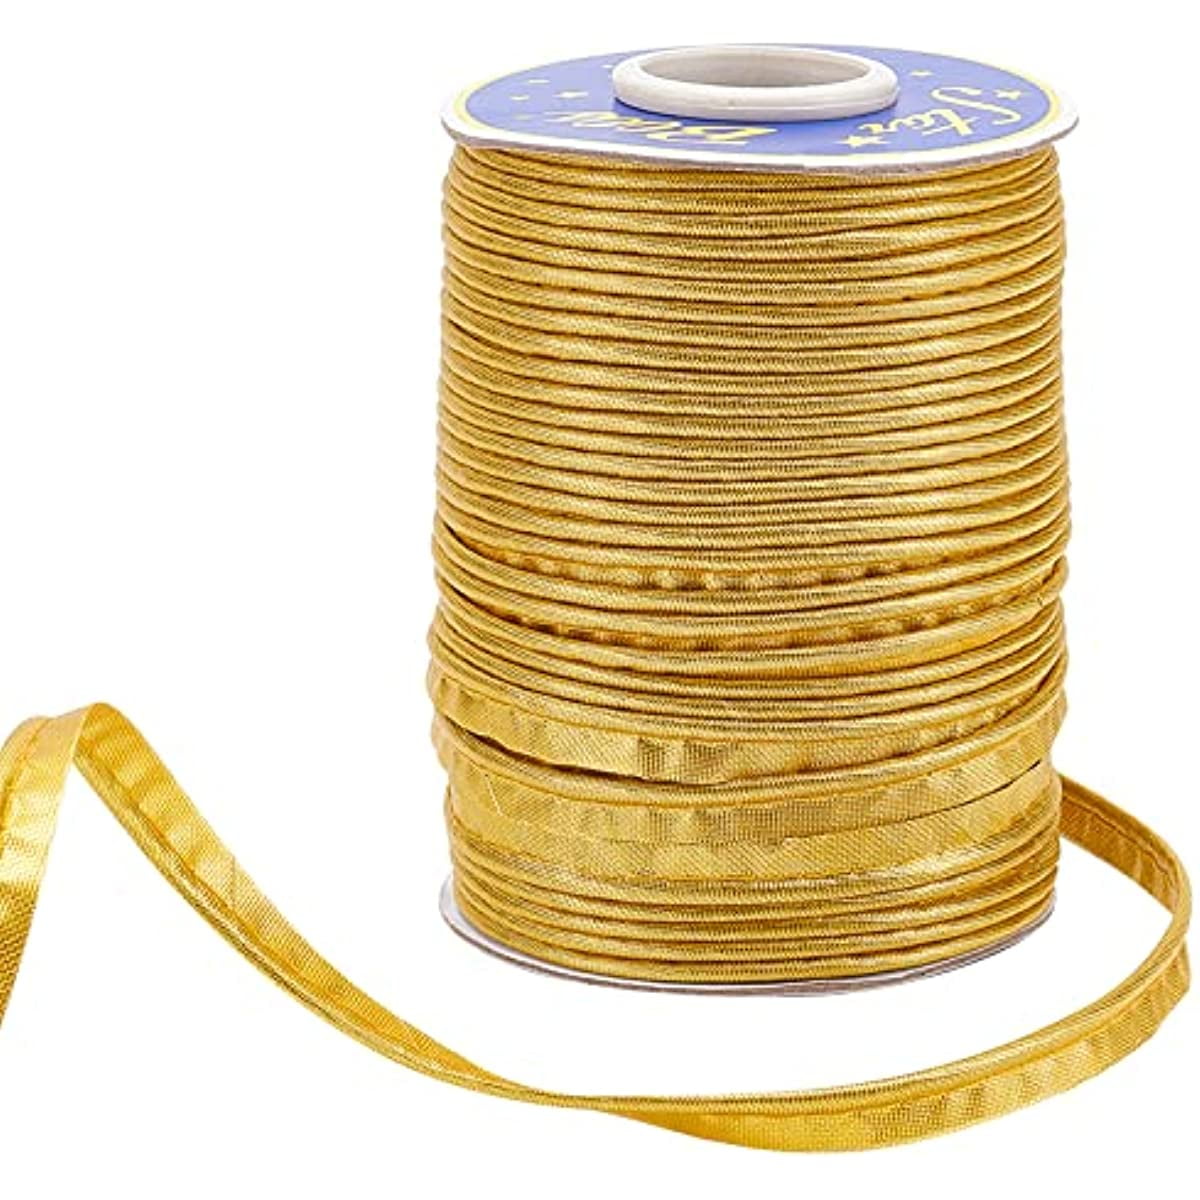 Gold/Golden Lamp Cord Cover Faux Silk 9 ft long